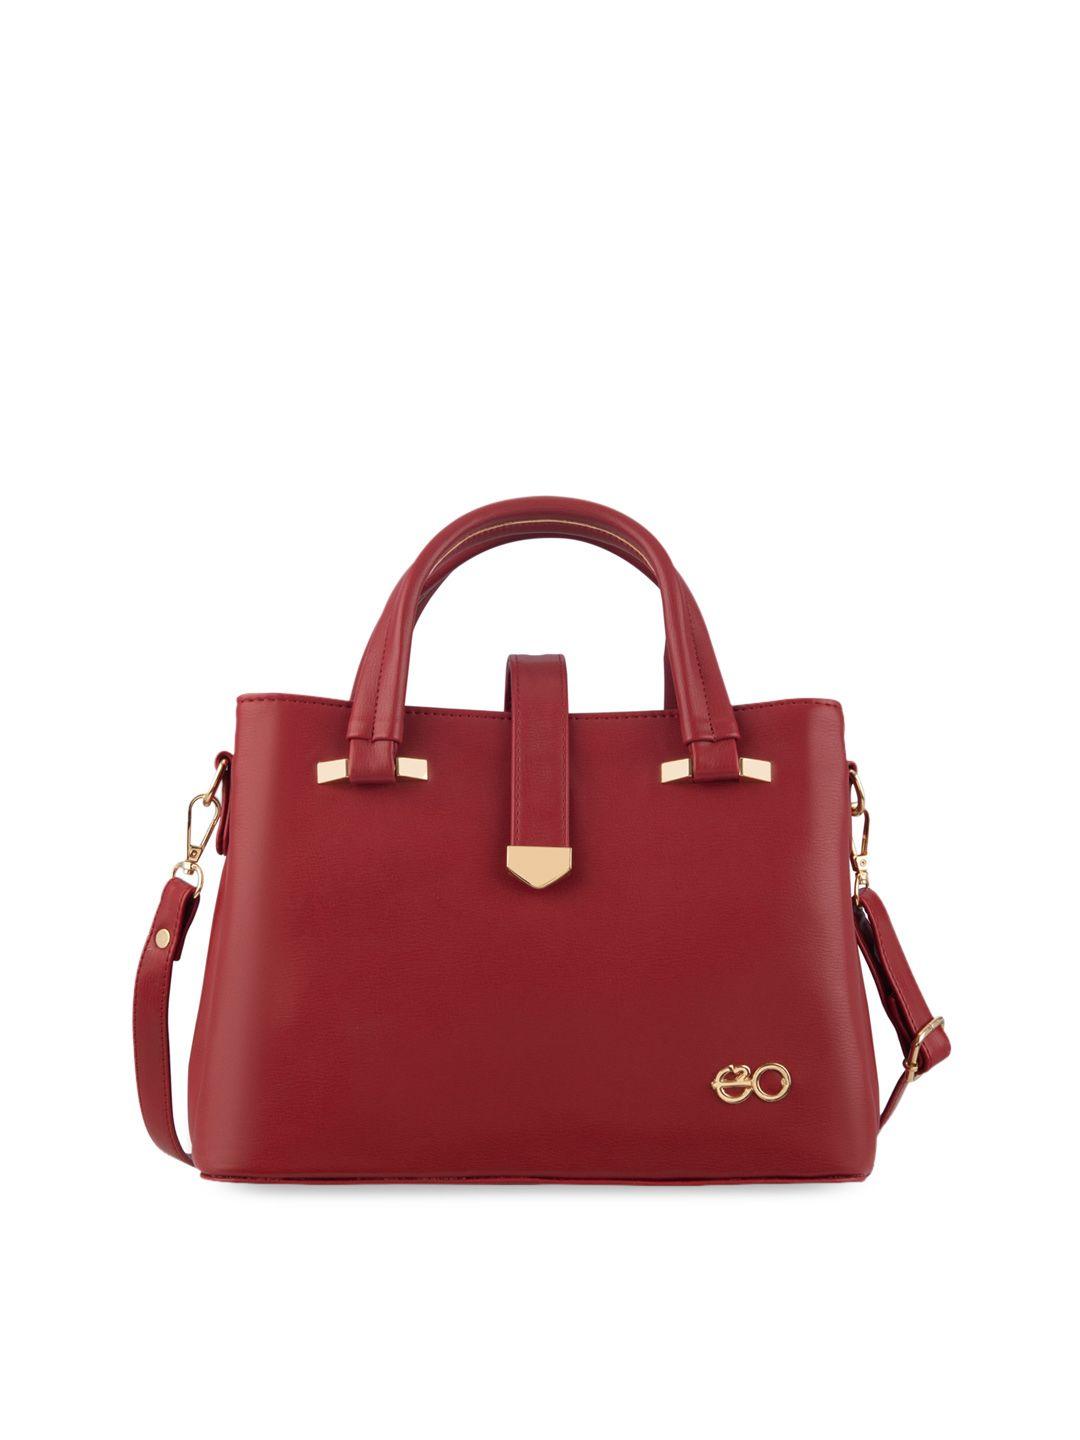 e2o red pu structured handheld bag with tasselled